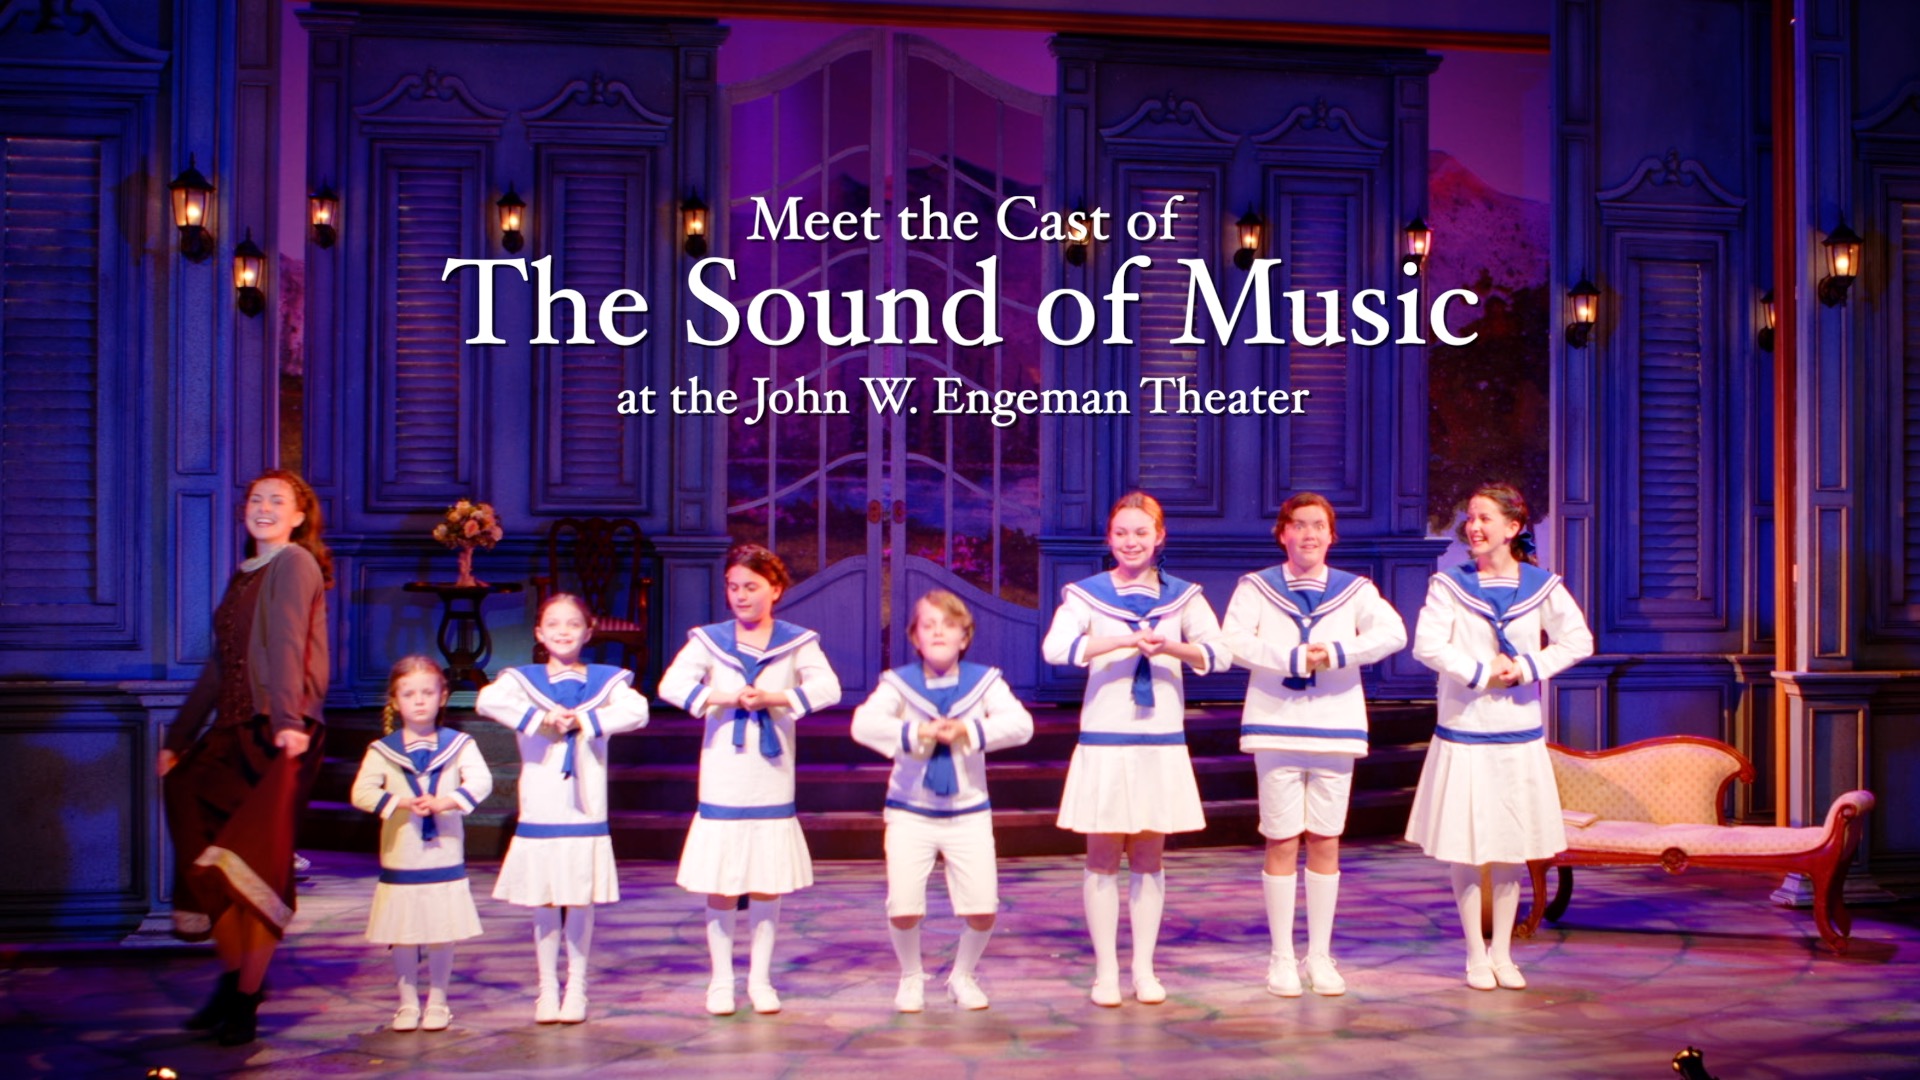 Meet The Cast of The Sound of Music at the John W. Engeman Theater